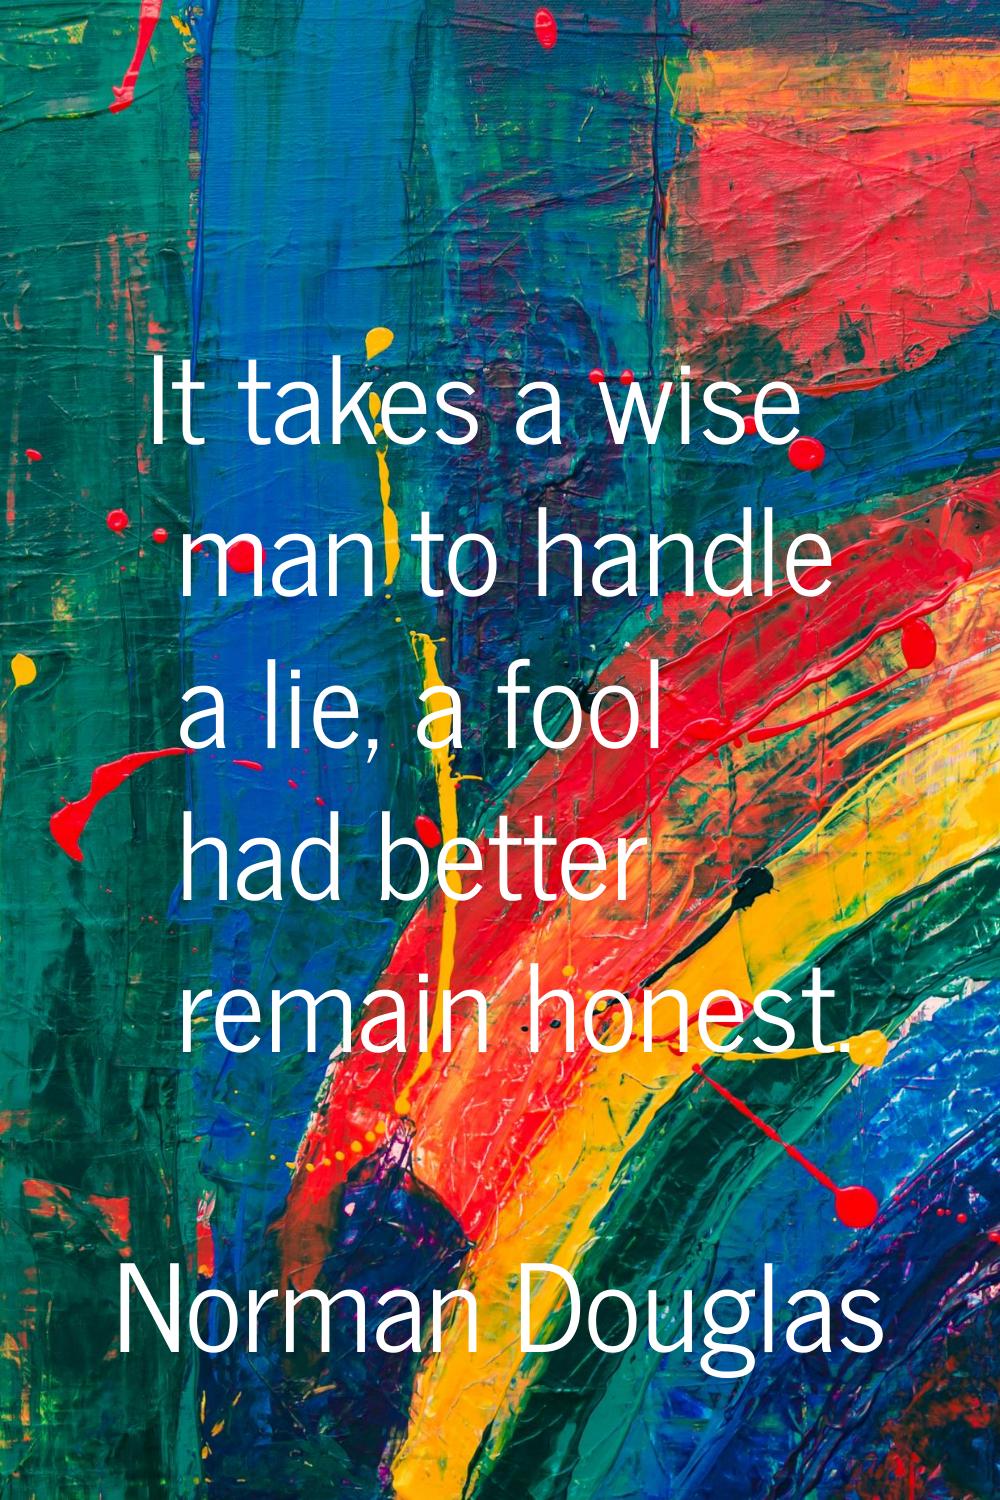 It takes a wise man to handle a lie, a fool had better remain honest.